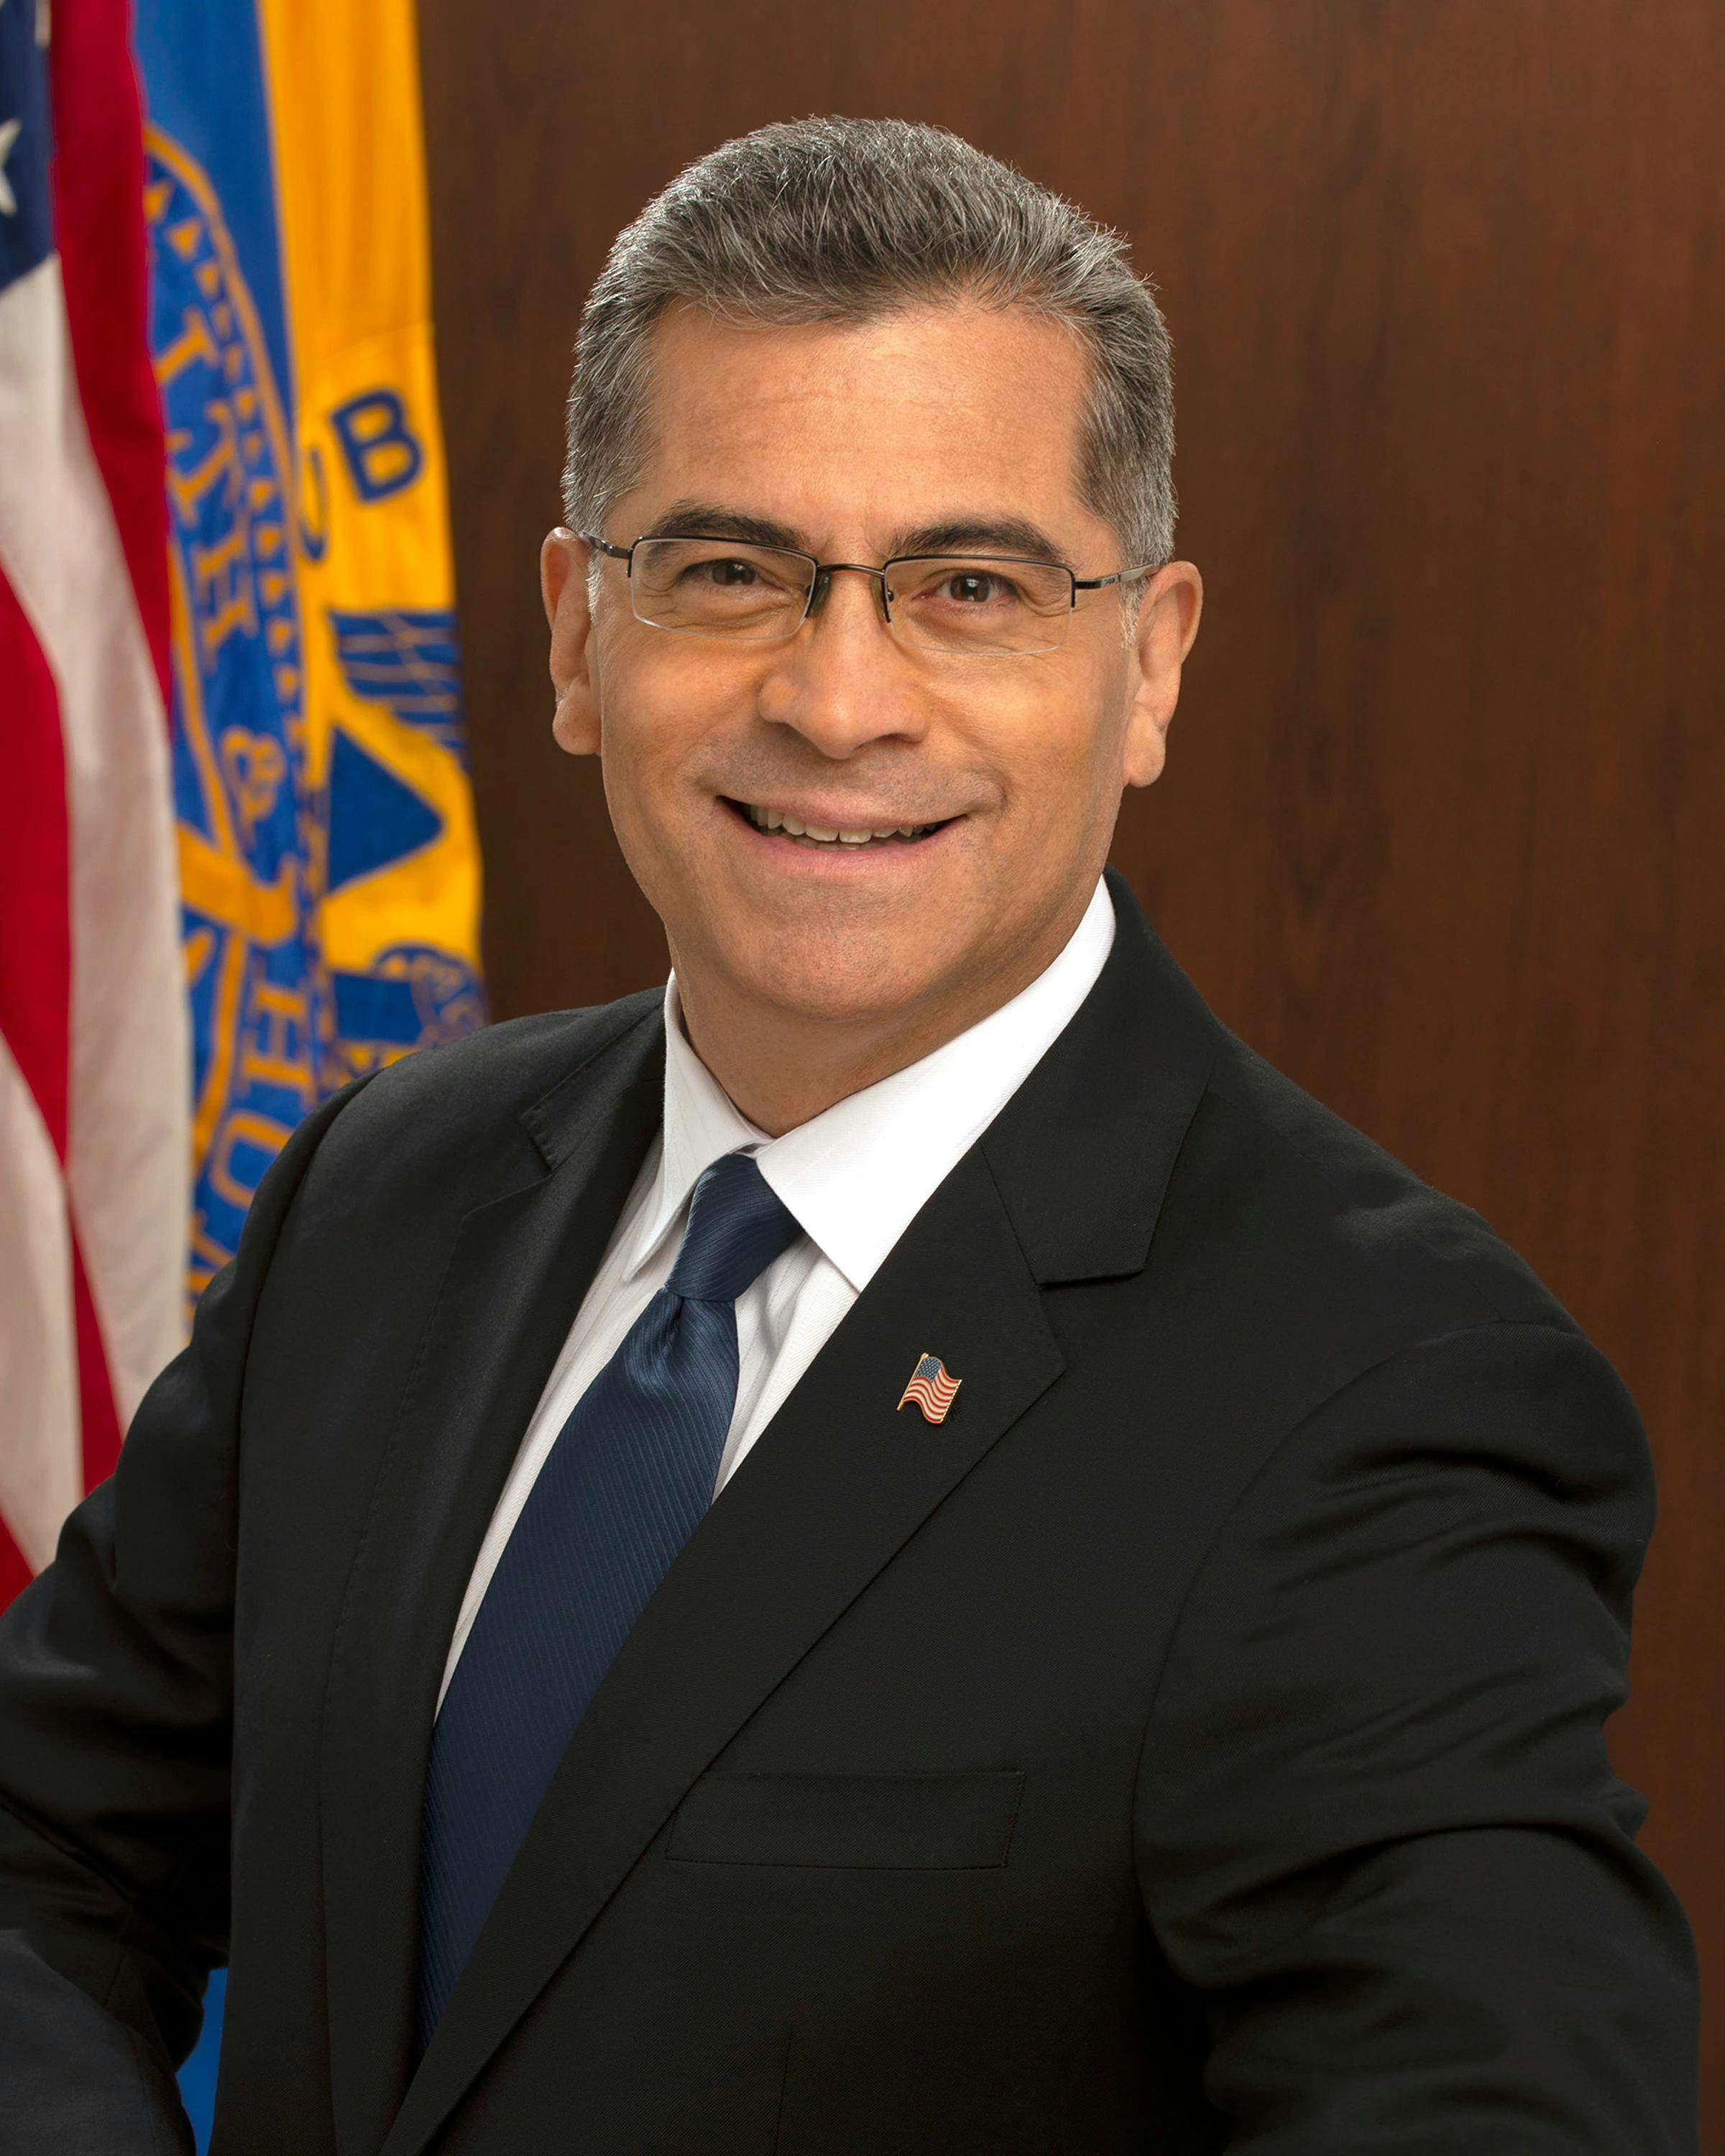 U.S. Health and Human Services Secretary Xavier Becerra is urging states to ensure that people who qualify for Medicaid get the assistance. More than 1 million Americans have lost Medicaid coverage in recent weeks. (Image: HHS)